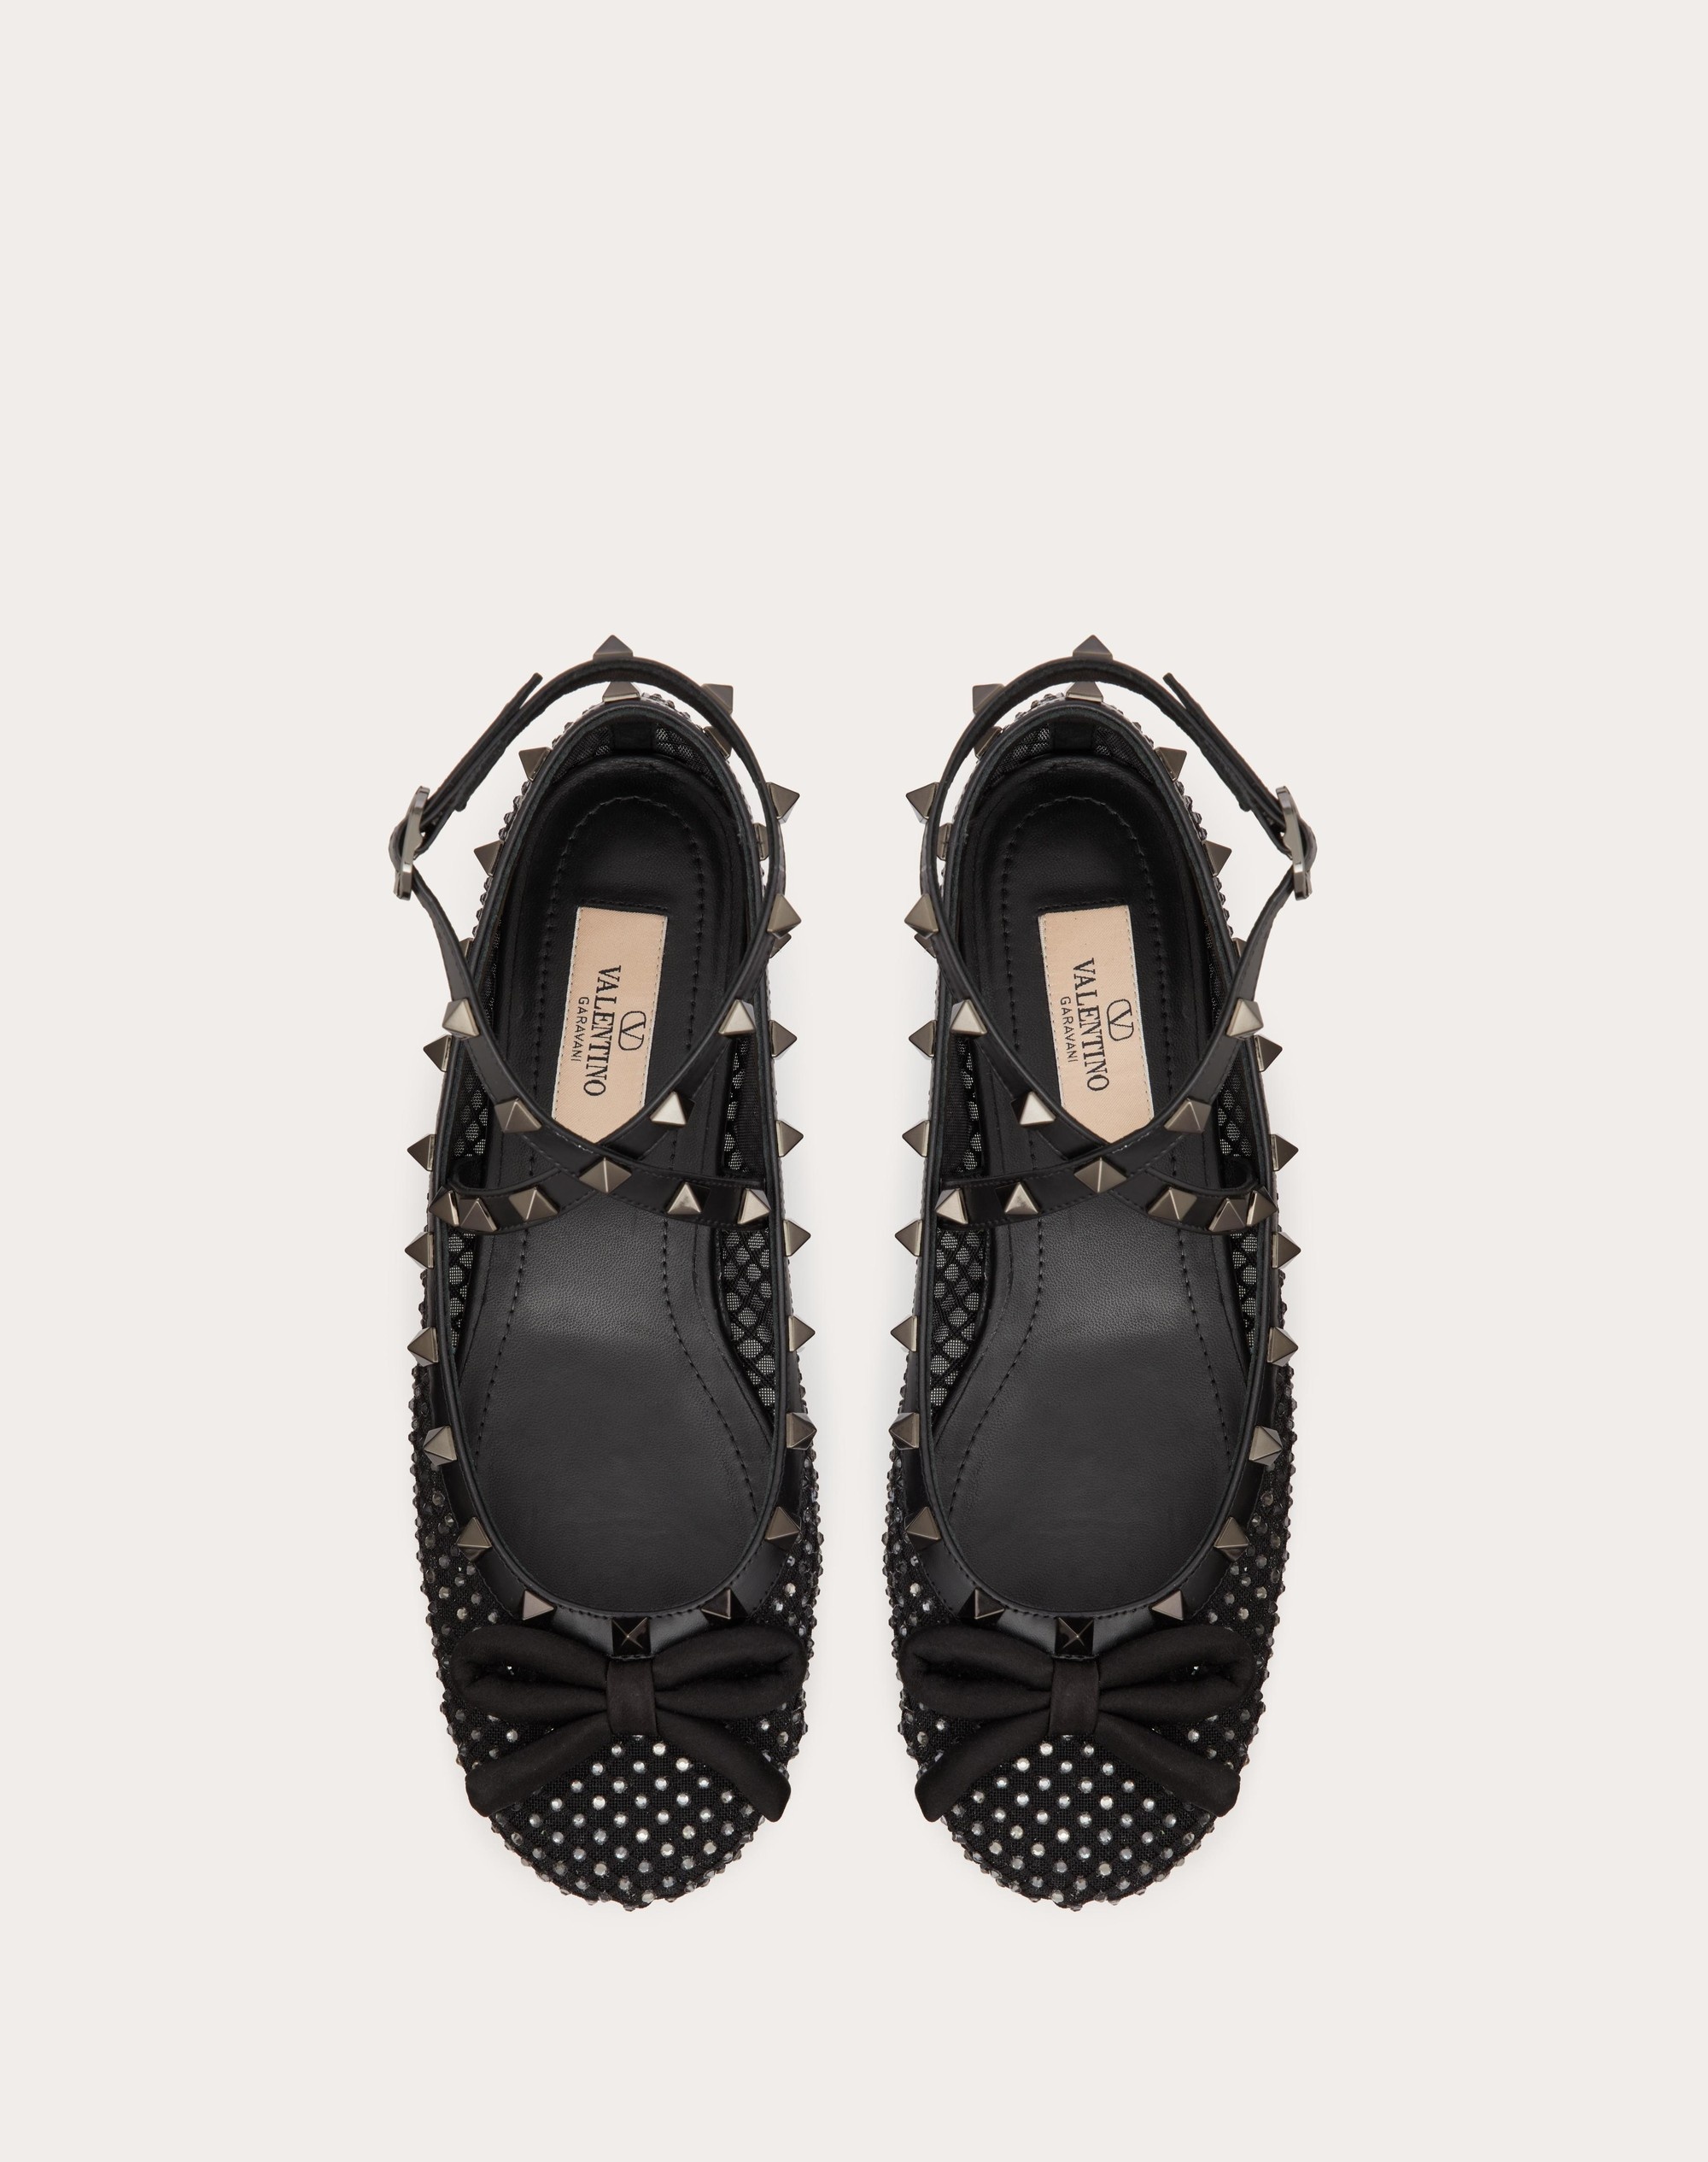 ROCKSTUD MESH BALLERINA WITH CRYSTALS AND MATCHING STUDS - 4